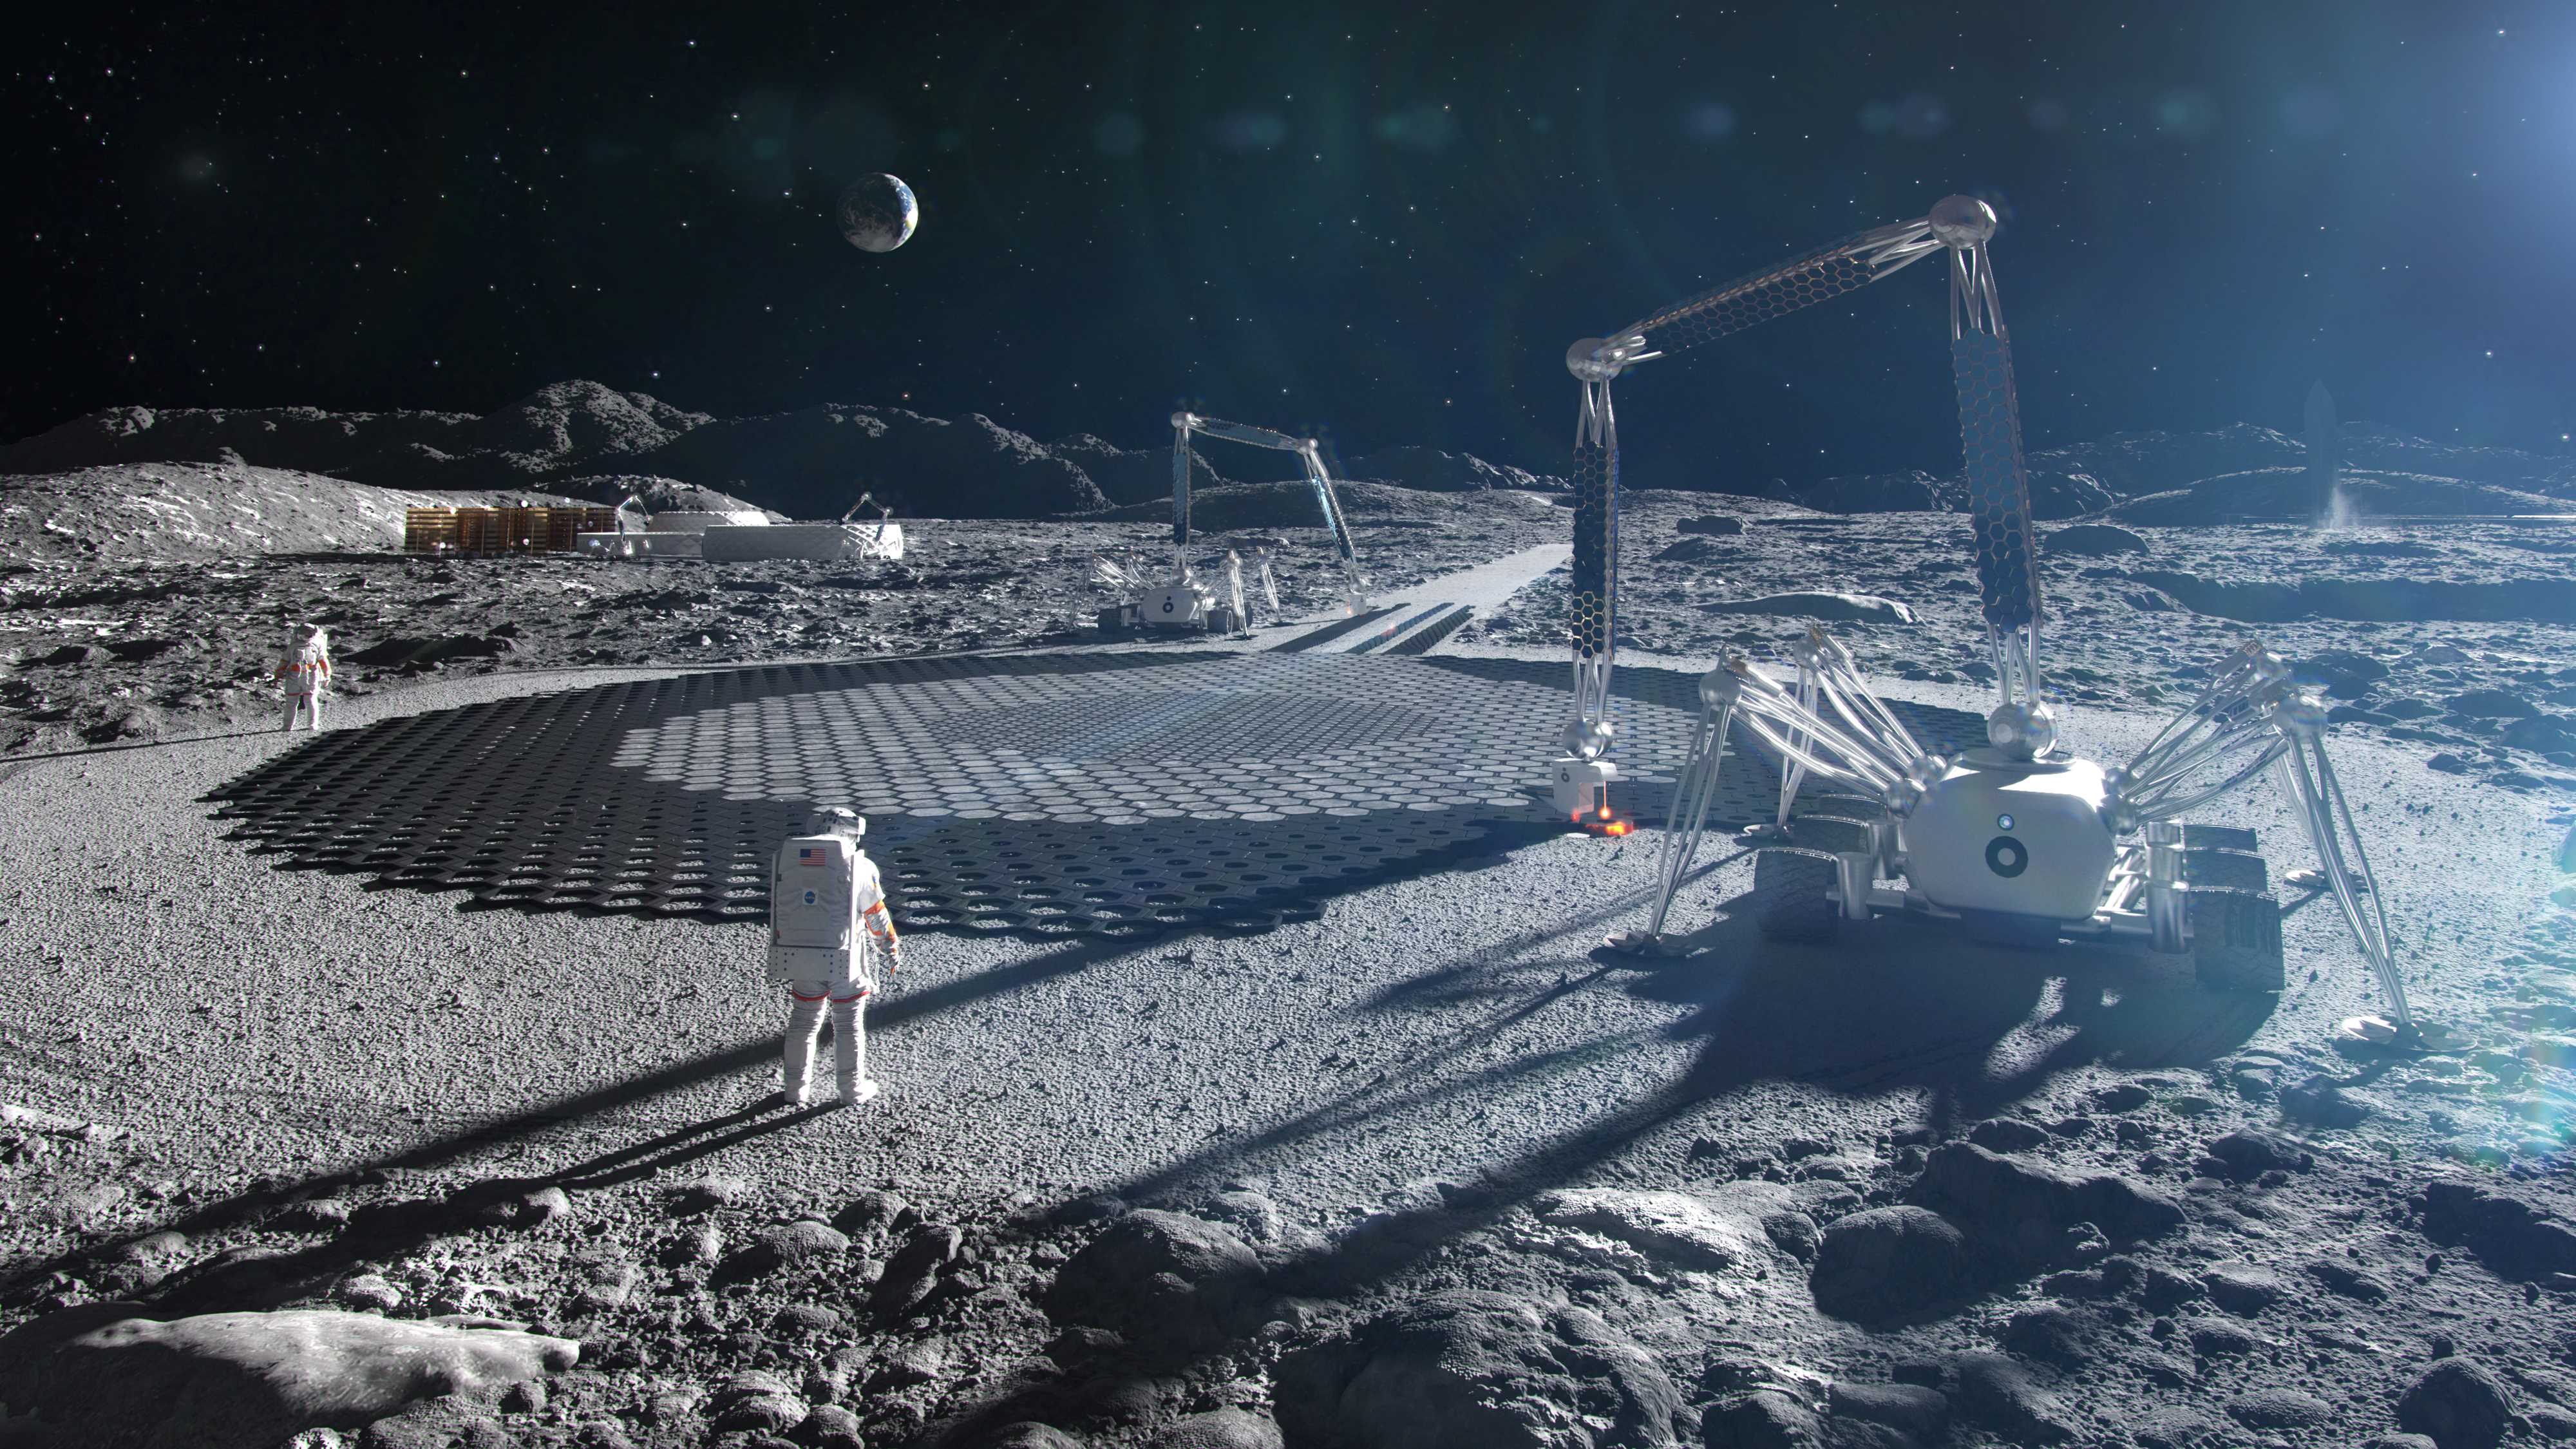 Moon mining gains momentum as private companies plan for a lunar economy